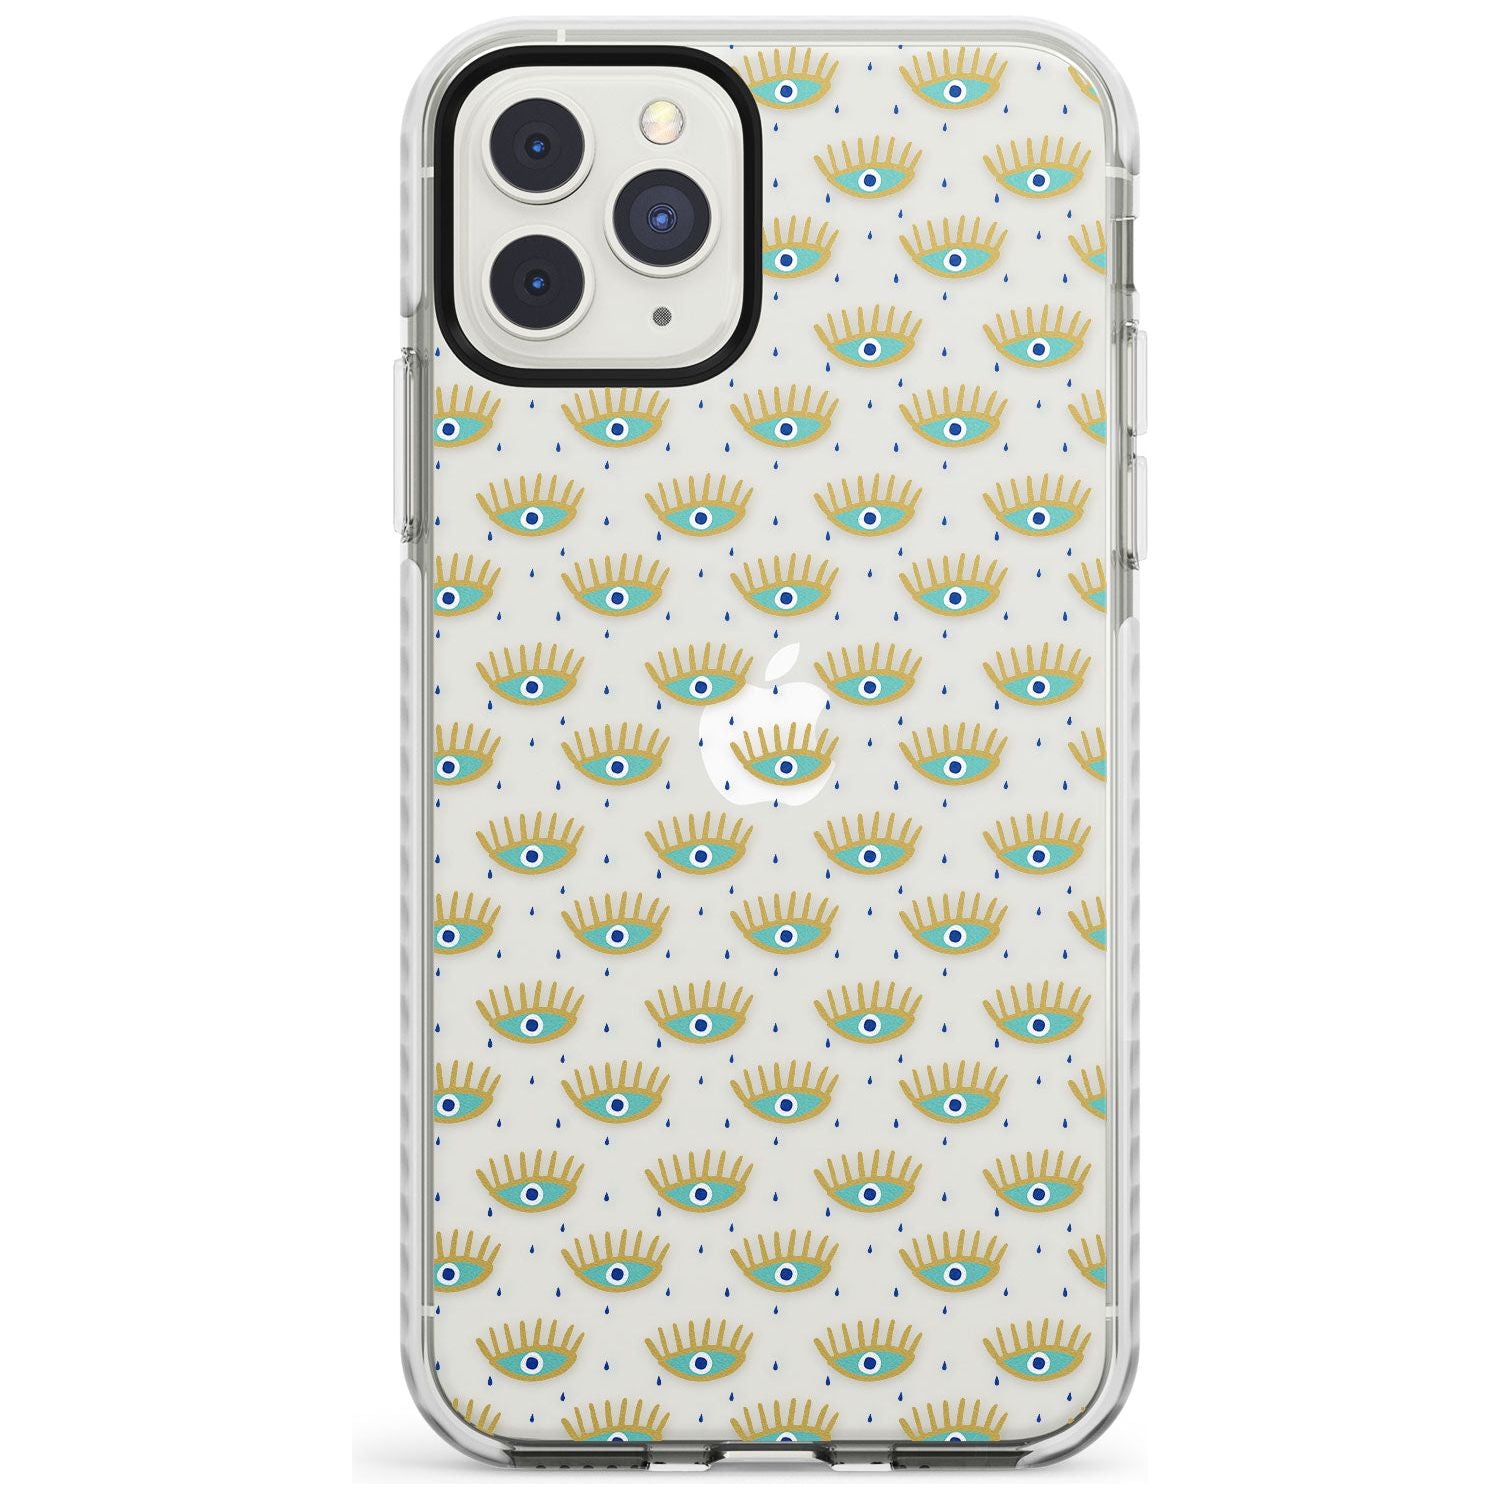 Crying Eyes (Clear) Psychedelic Eyes Pattern Impact Phone Case for iPhone 11 Pro Max